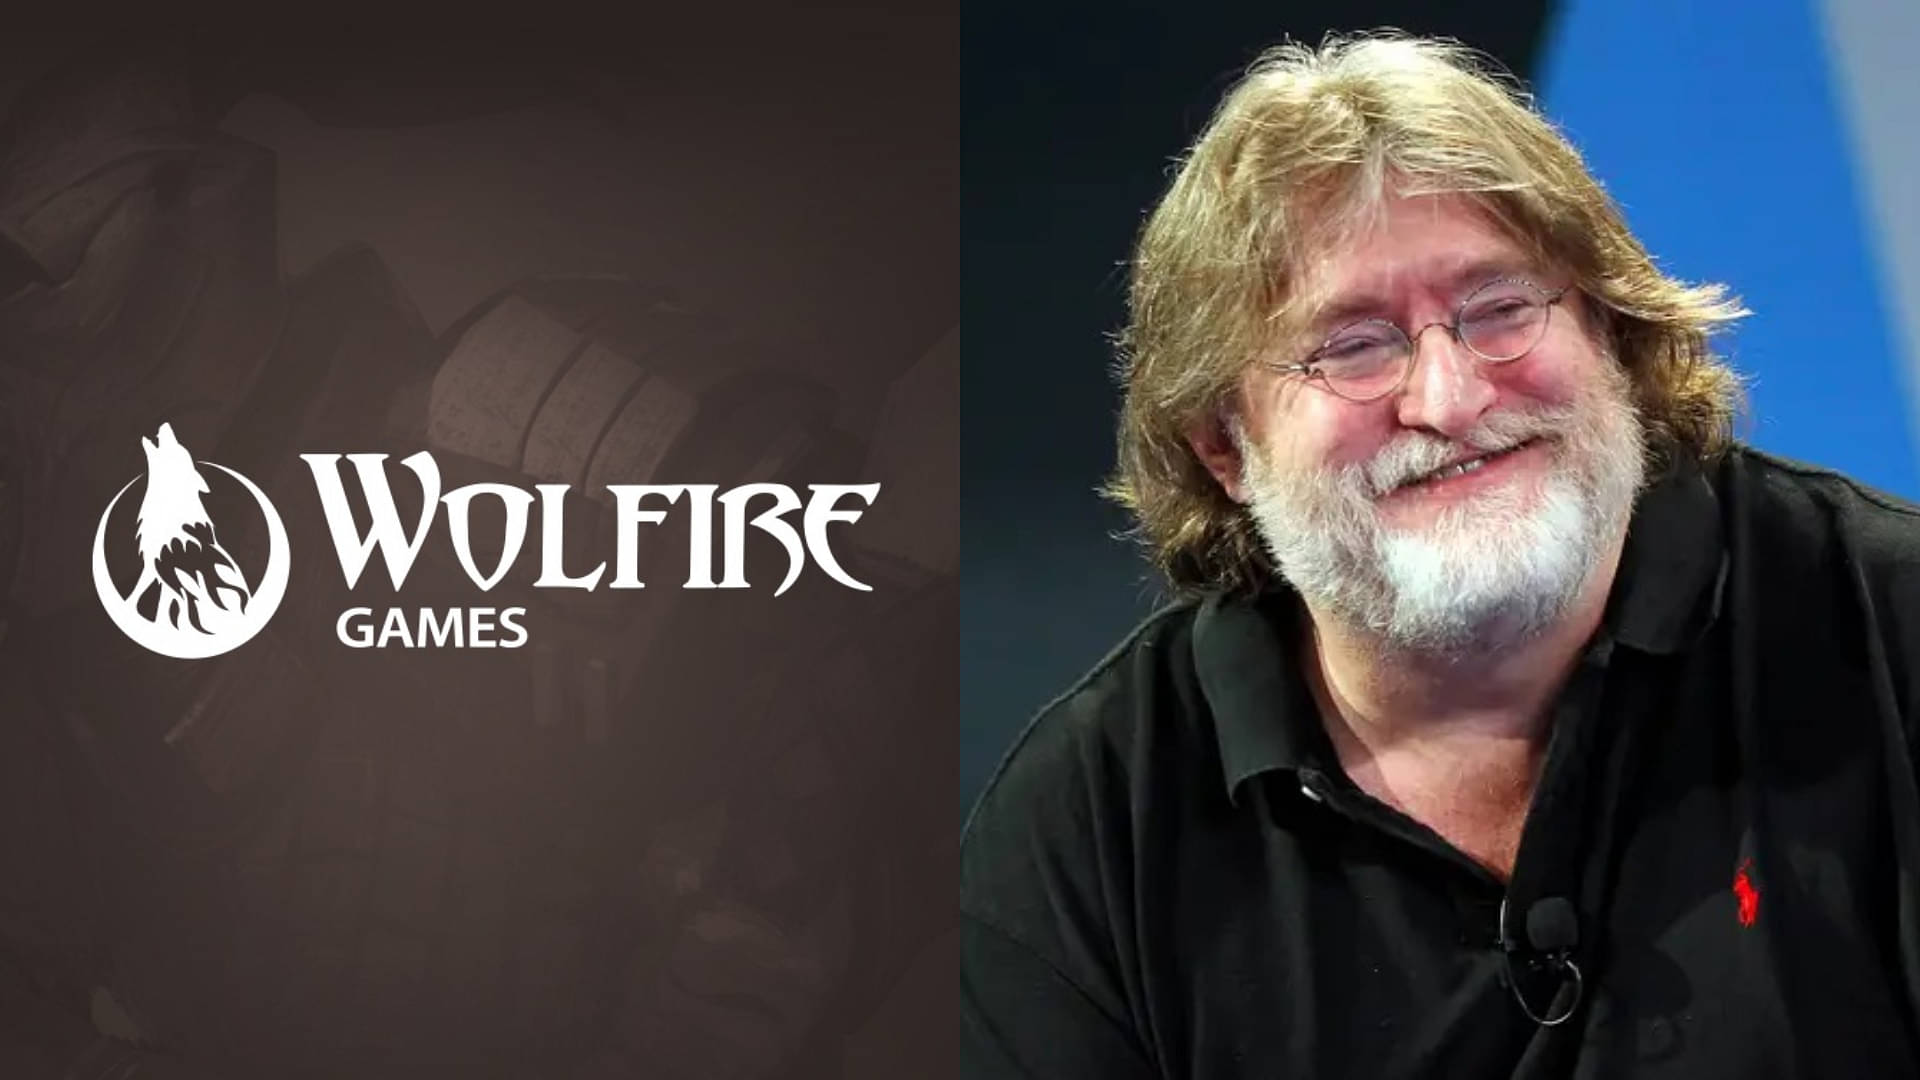 Wolfire Games accuses Valve CEO Gabe Newell